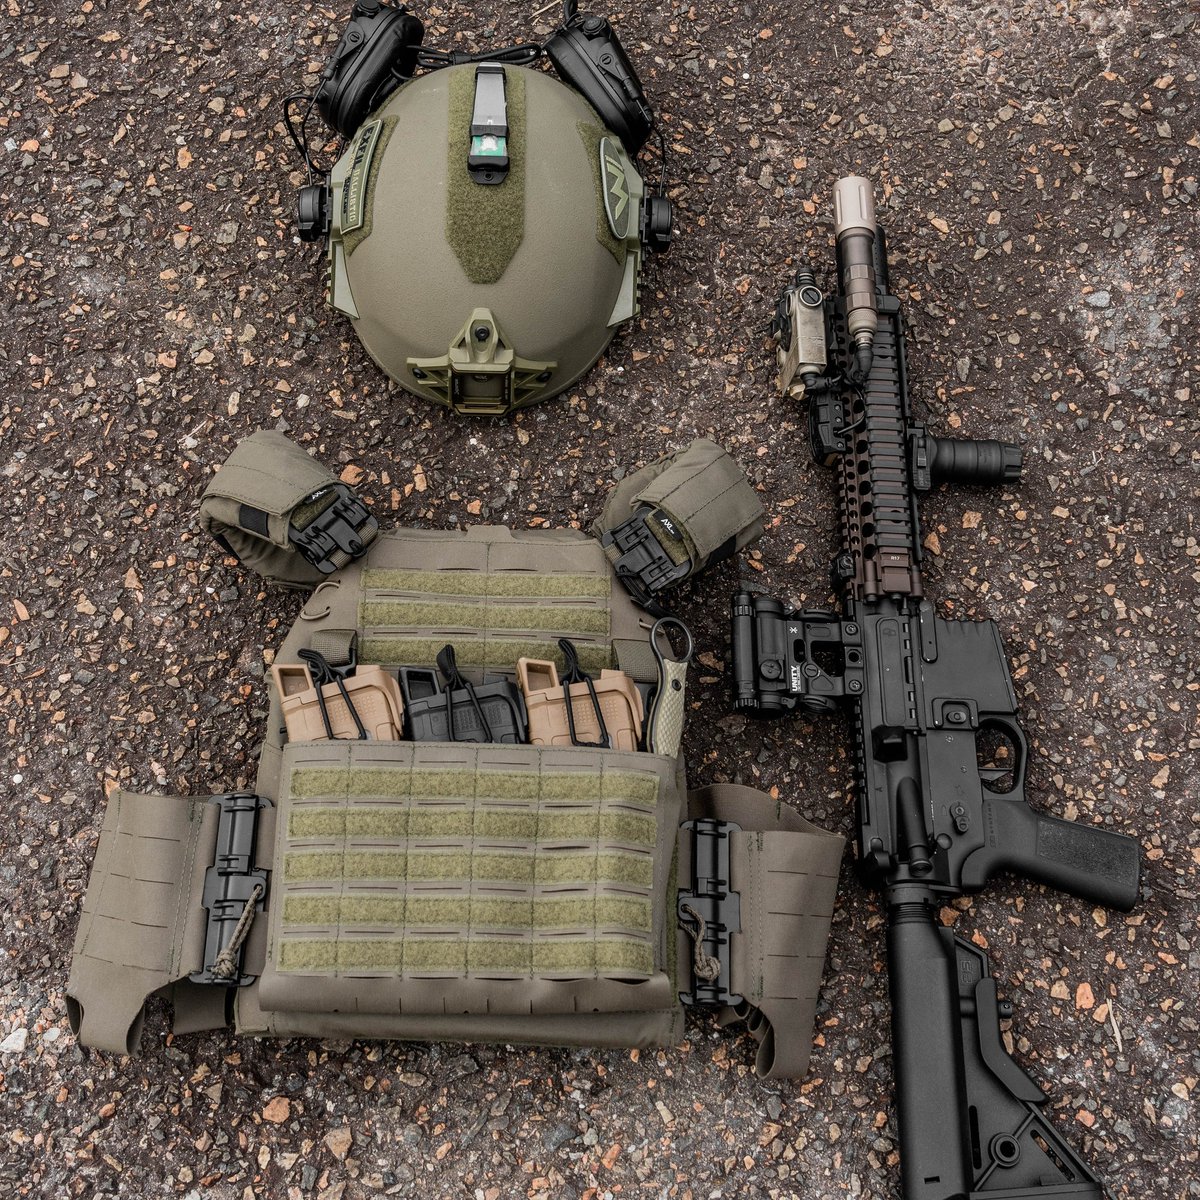 Been in a Ranger Green mood lately… and I definitely don’t hate it.
#rangergreen #ootd #magpod #rangetime #outdoors #magpod #dowork #aimpoint #teamwendy #gogreen
#MadeInUSA 🇺🇸 #SmallBusiness #Manufacturer #rainetactical #tacticalgear #rtg #tactical #gear